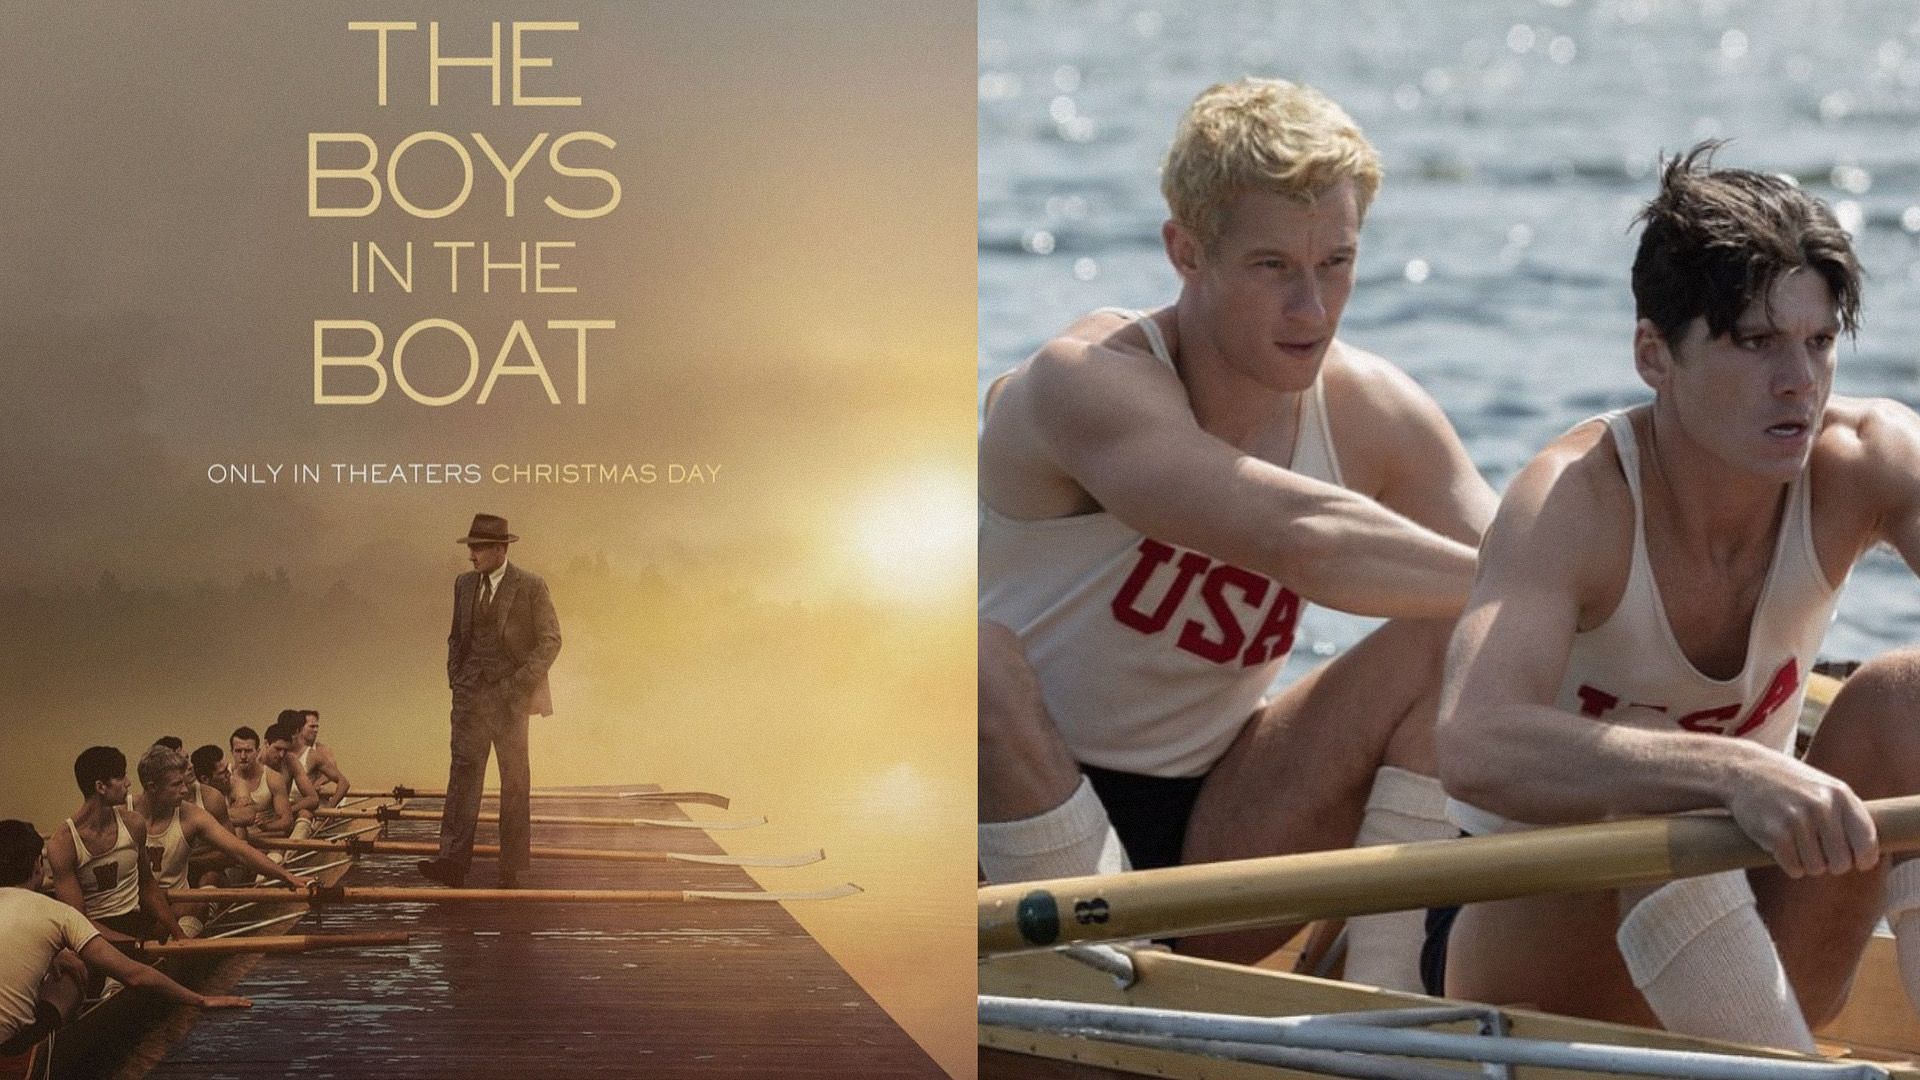 Where to watch The Boys in the Boat? All streaming options explored